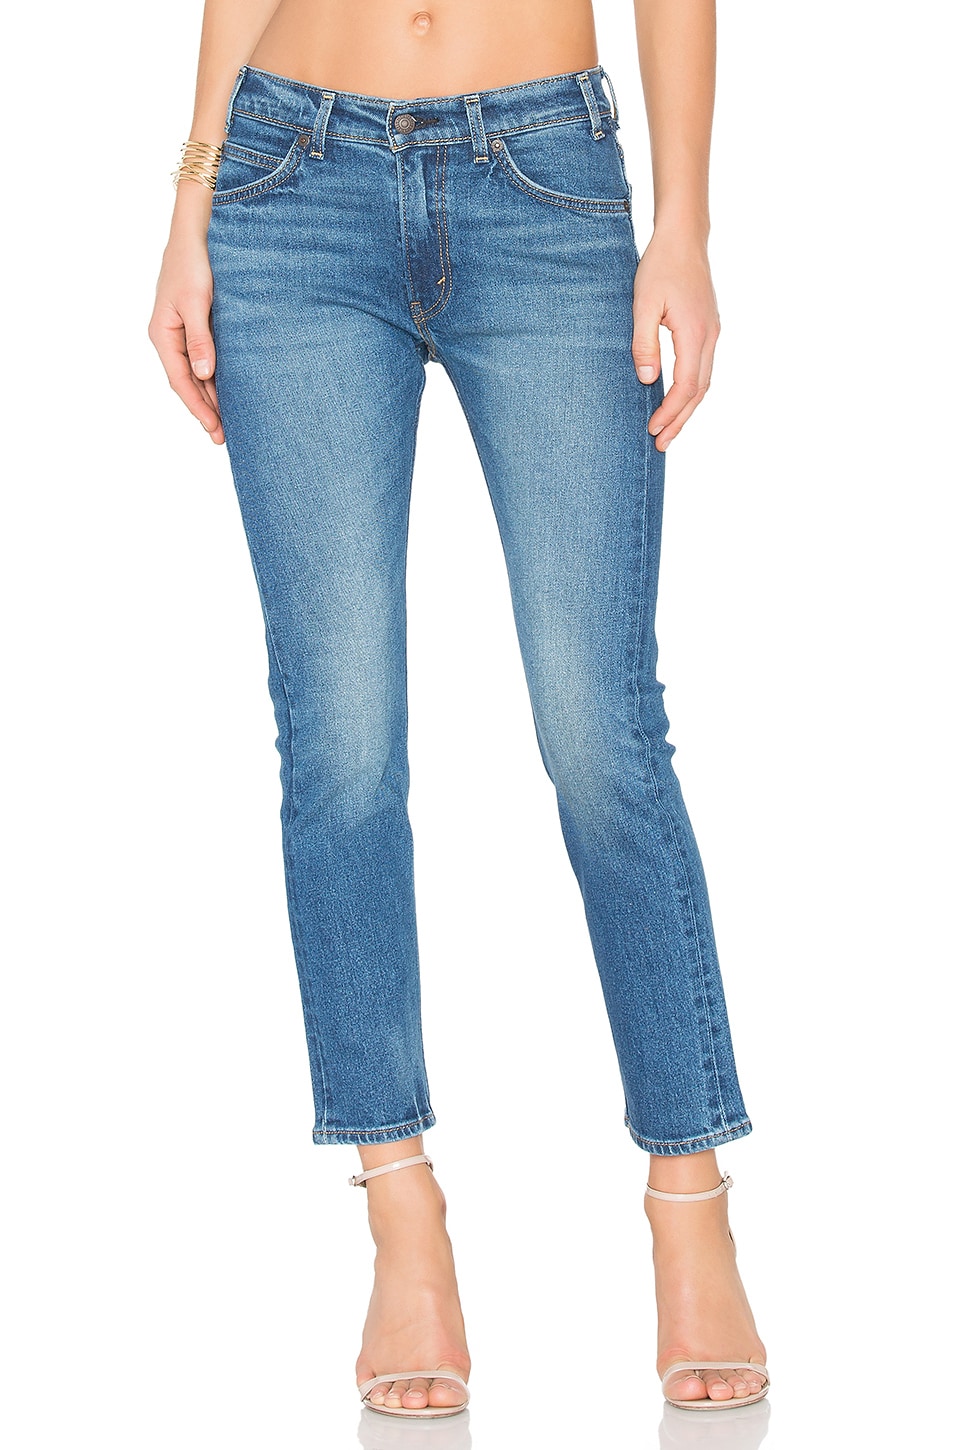 LEVI'S 505 C Cropped in Blue Cheer | REVOLVE